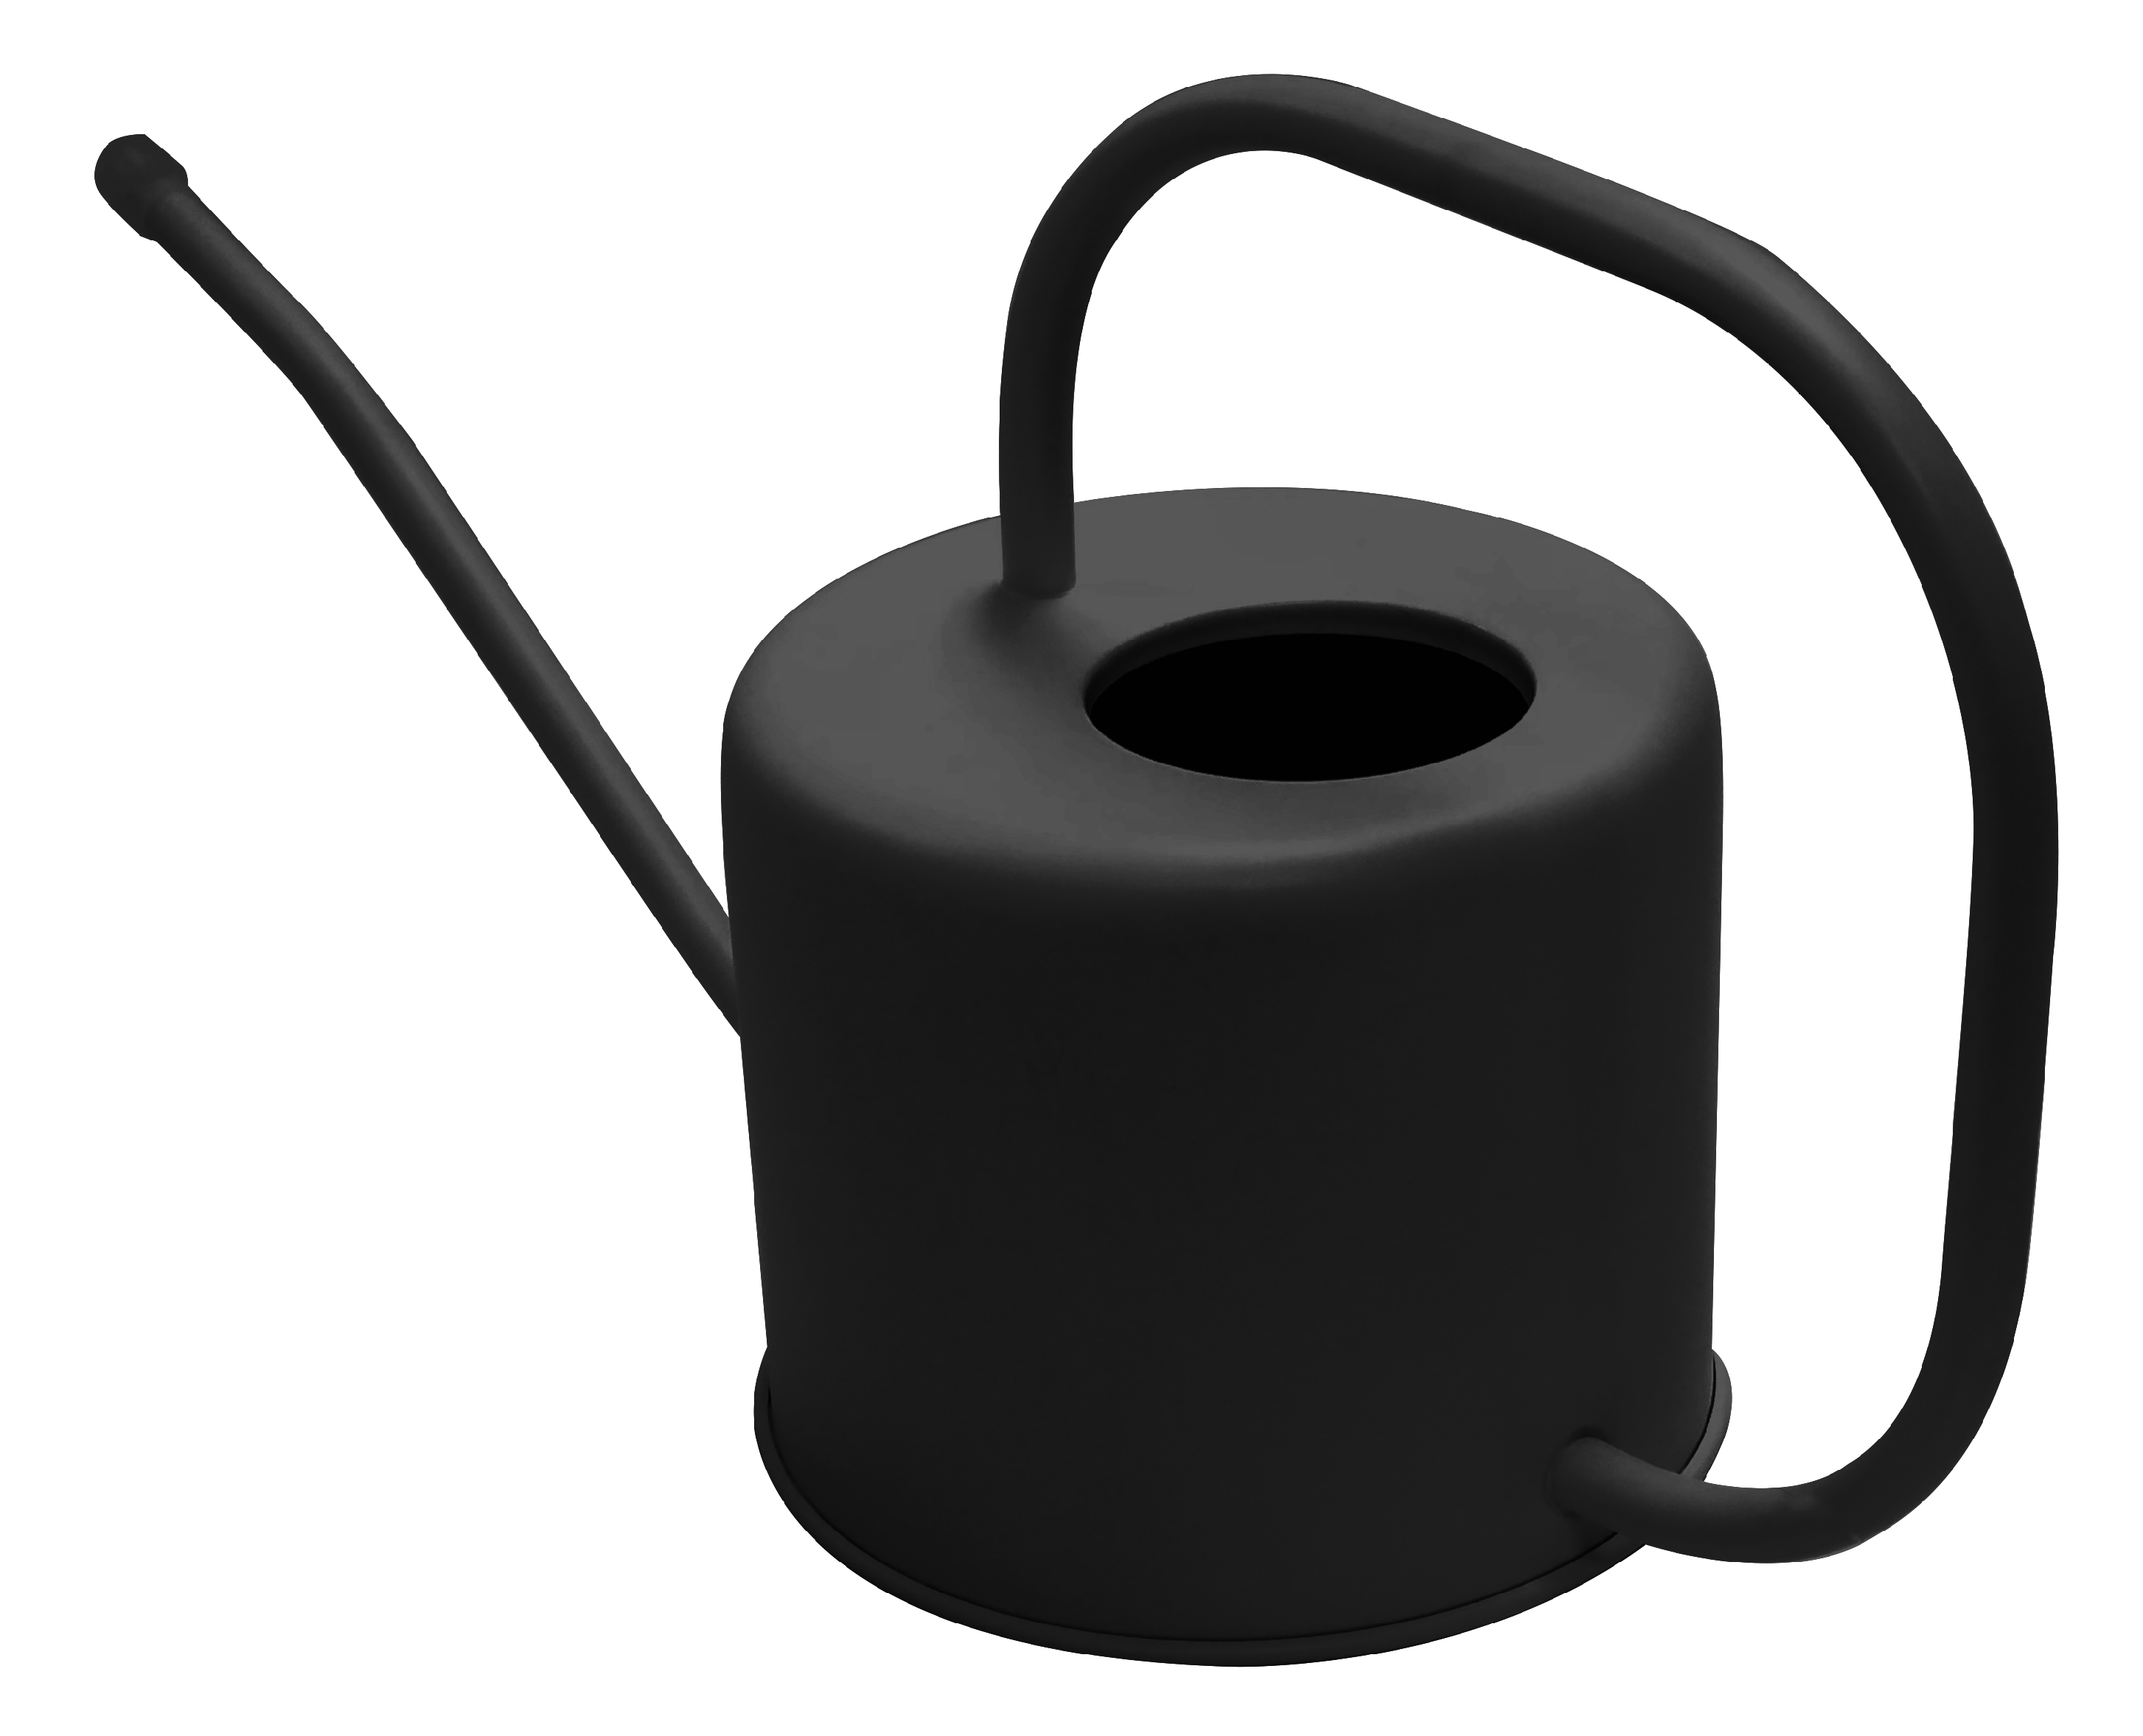 Better Homes & Gardens .35 Gallon Metal Watering Can, Matte Black - image 4 of 5